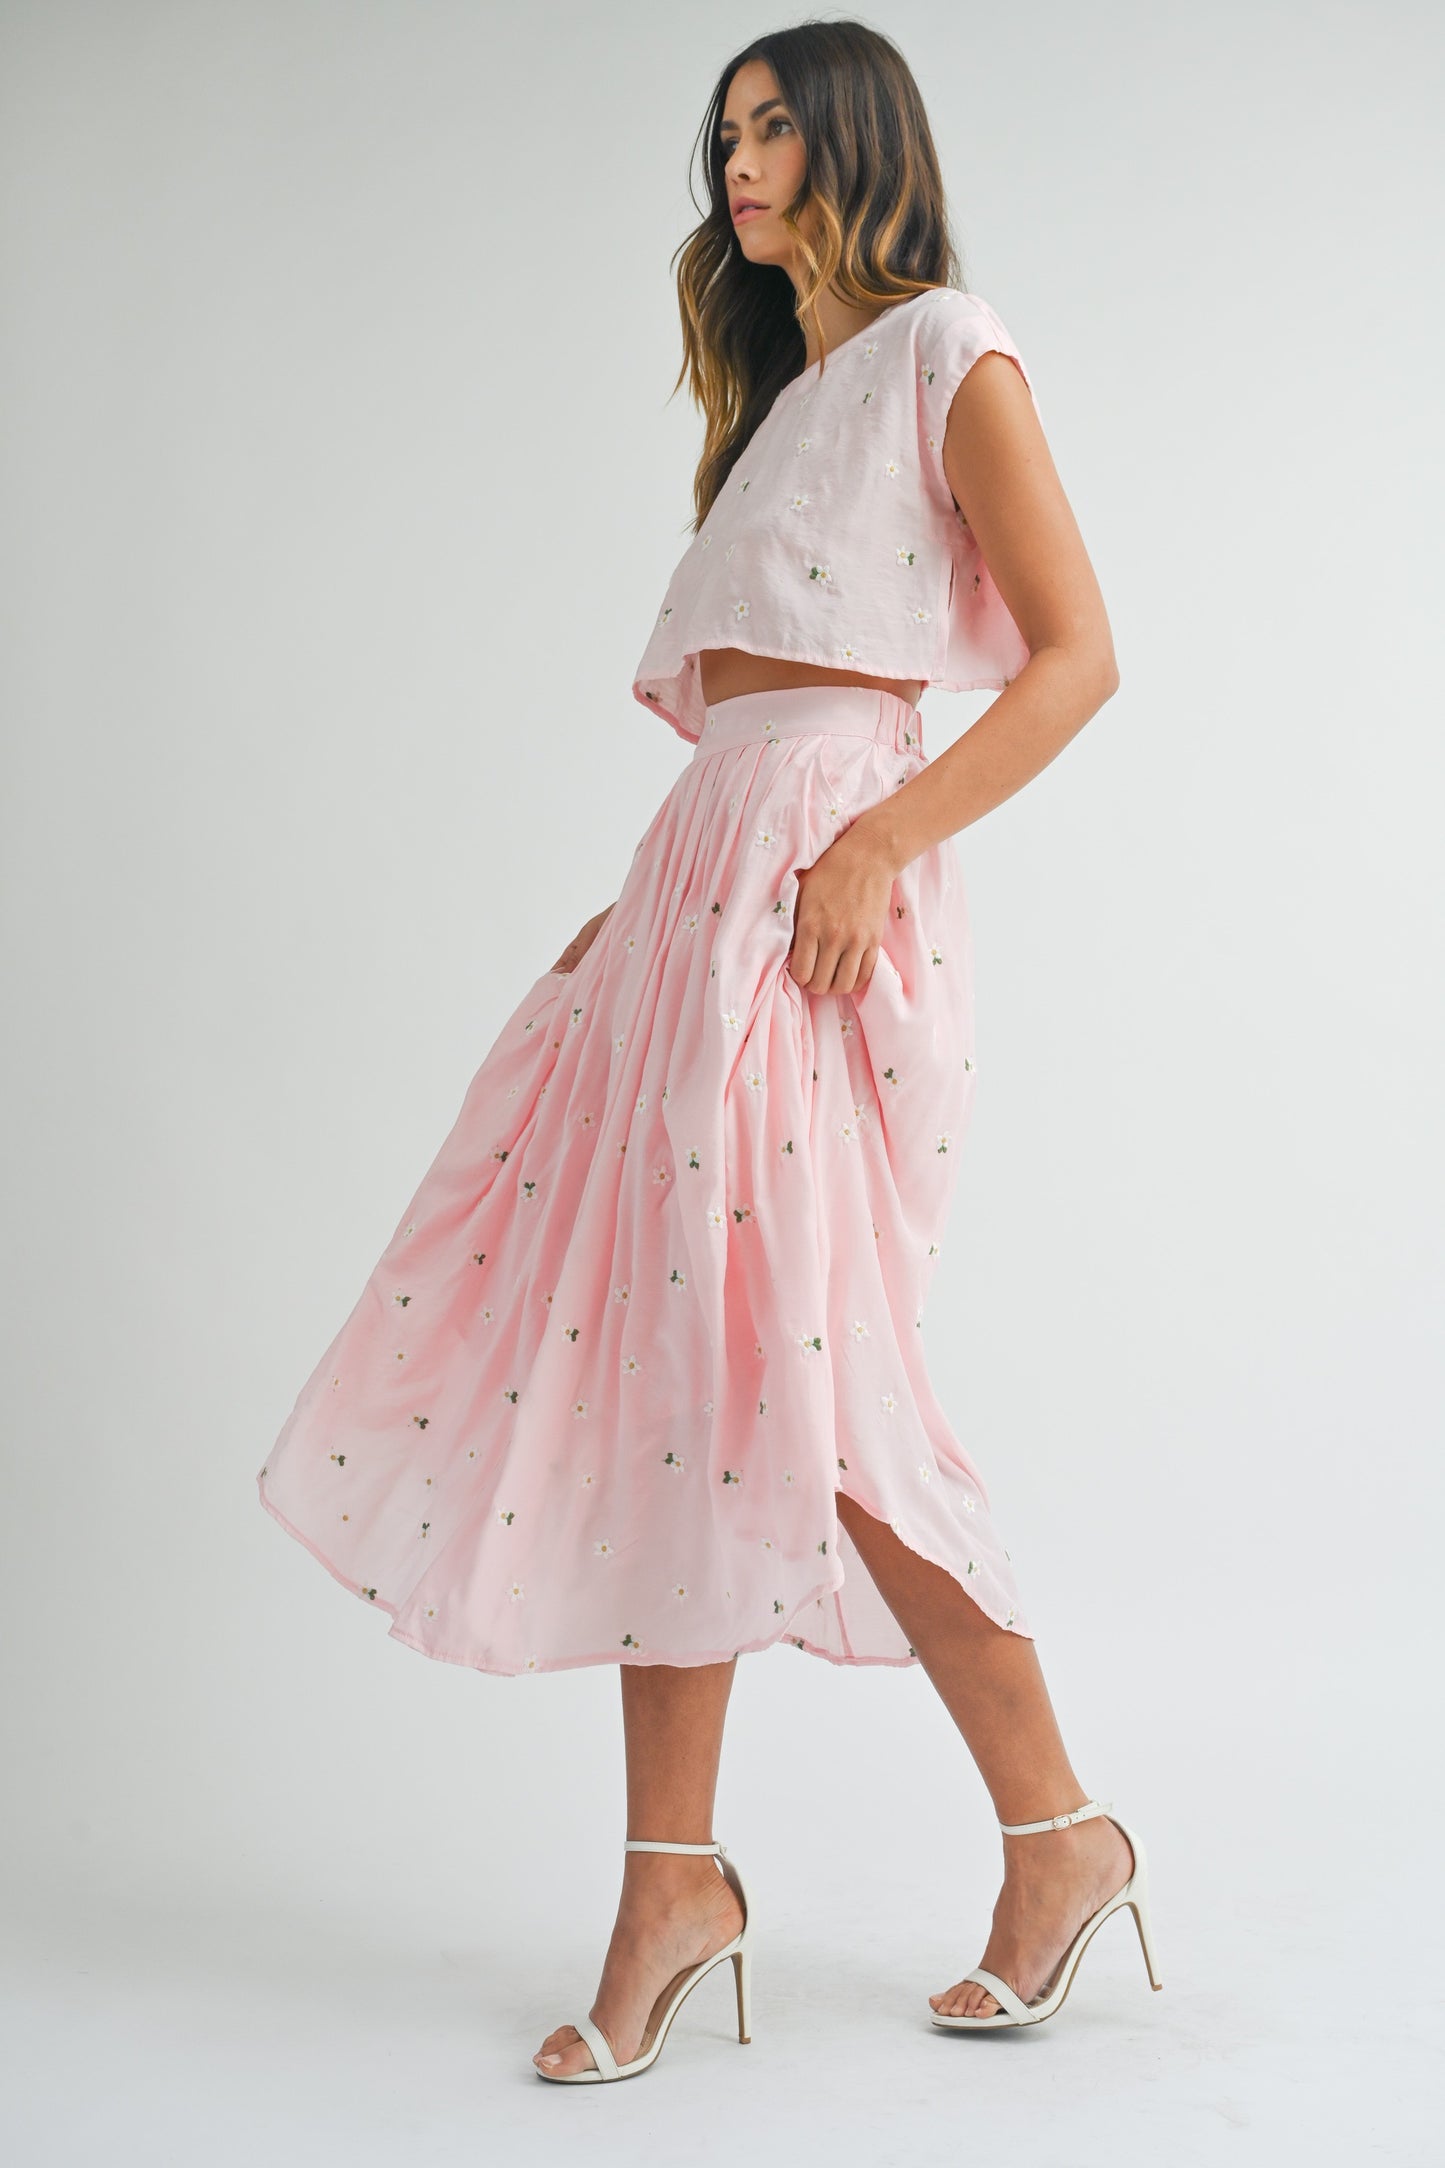 FLORAL EMBIORDERY CROP TOP AND MIDI SKIRT SET